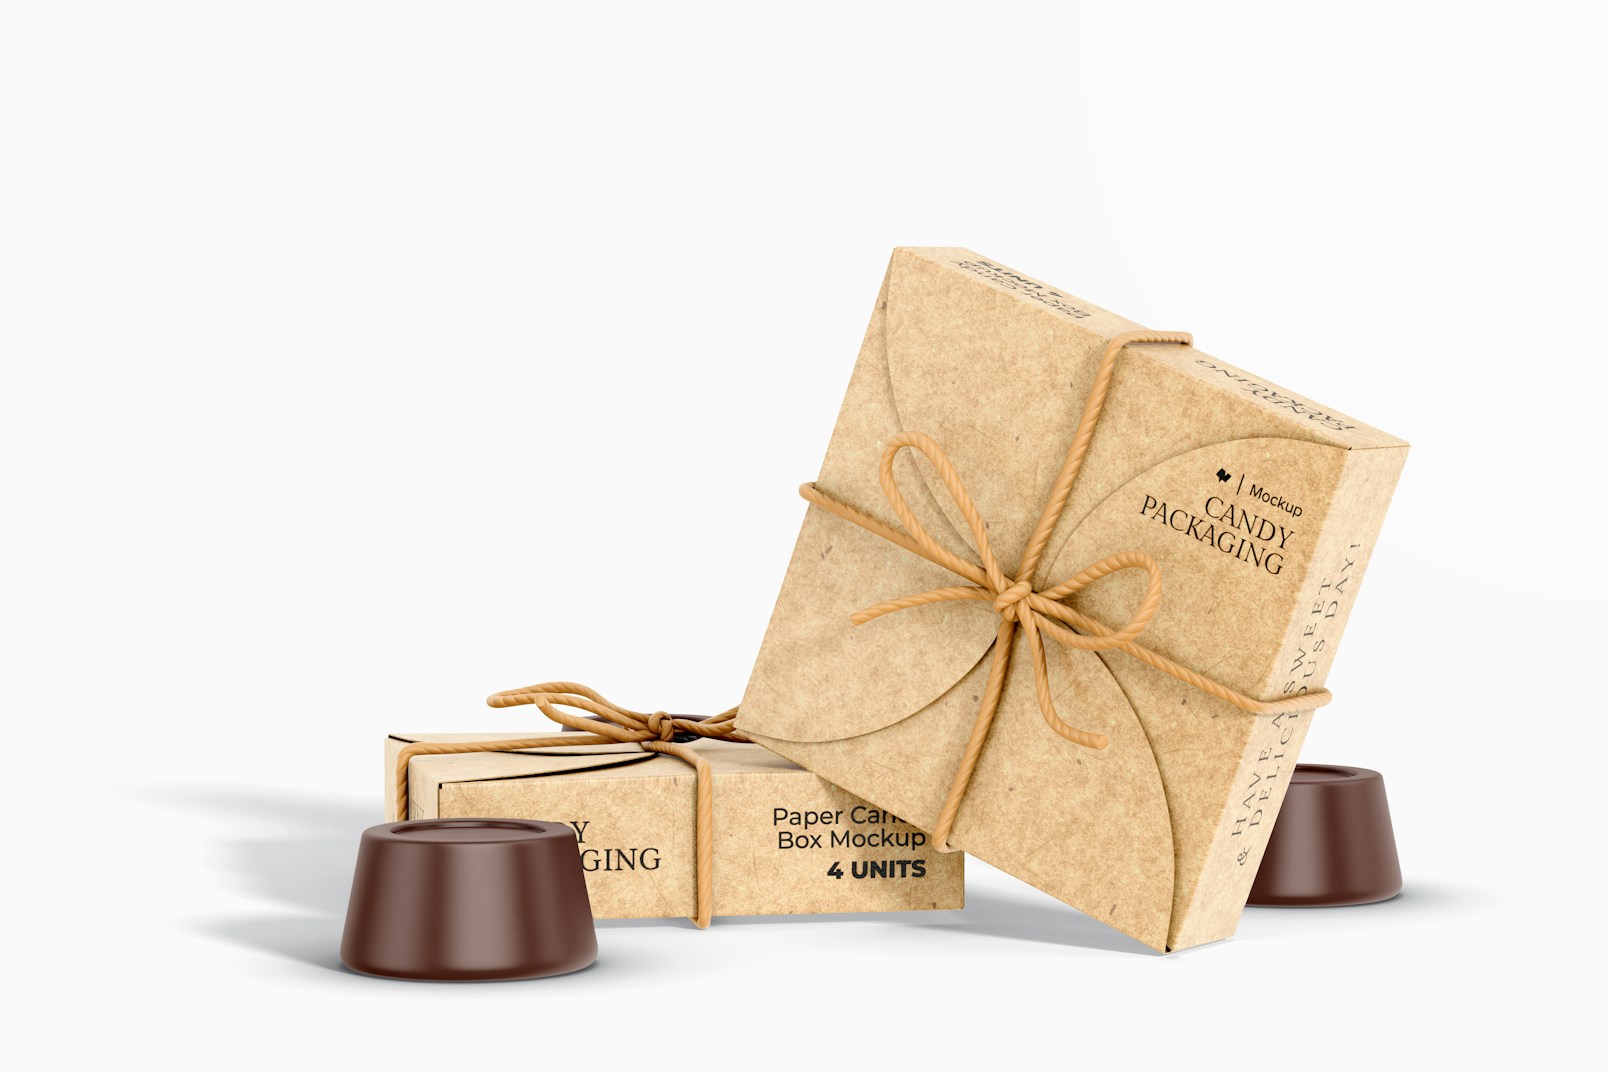 Paper Candy Box Mockup, with Chocolate